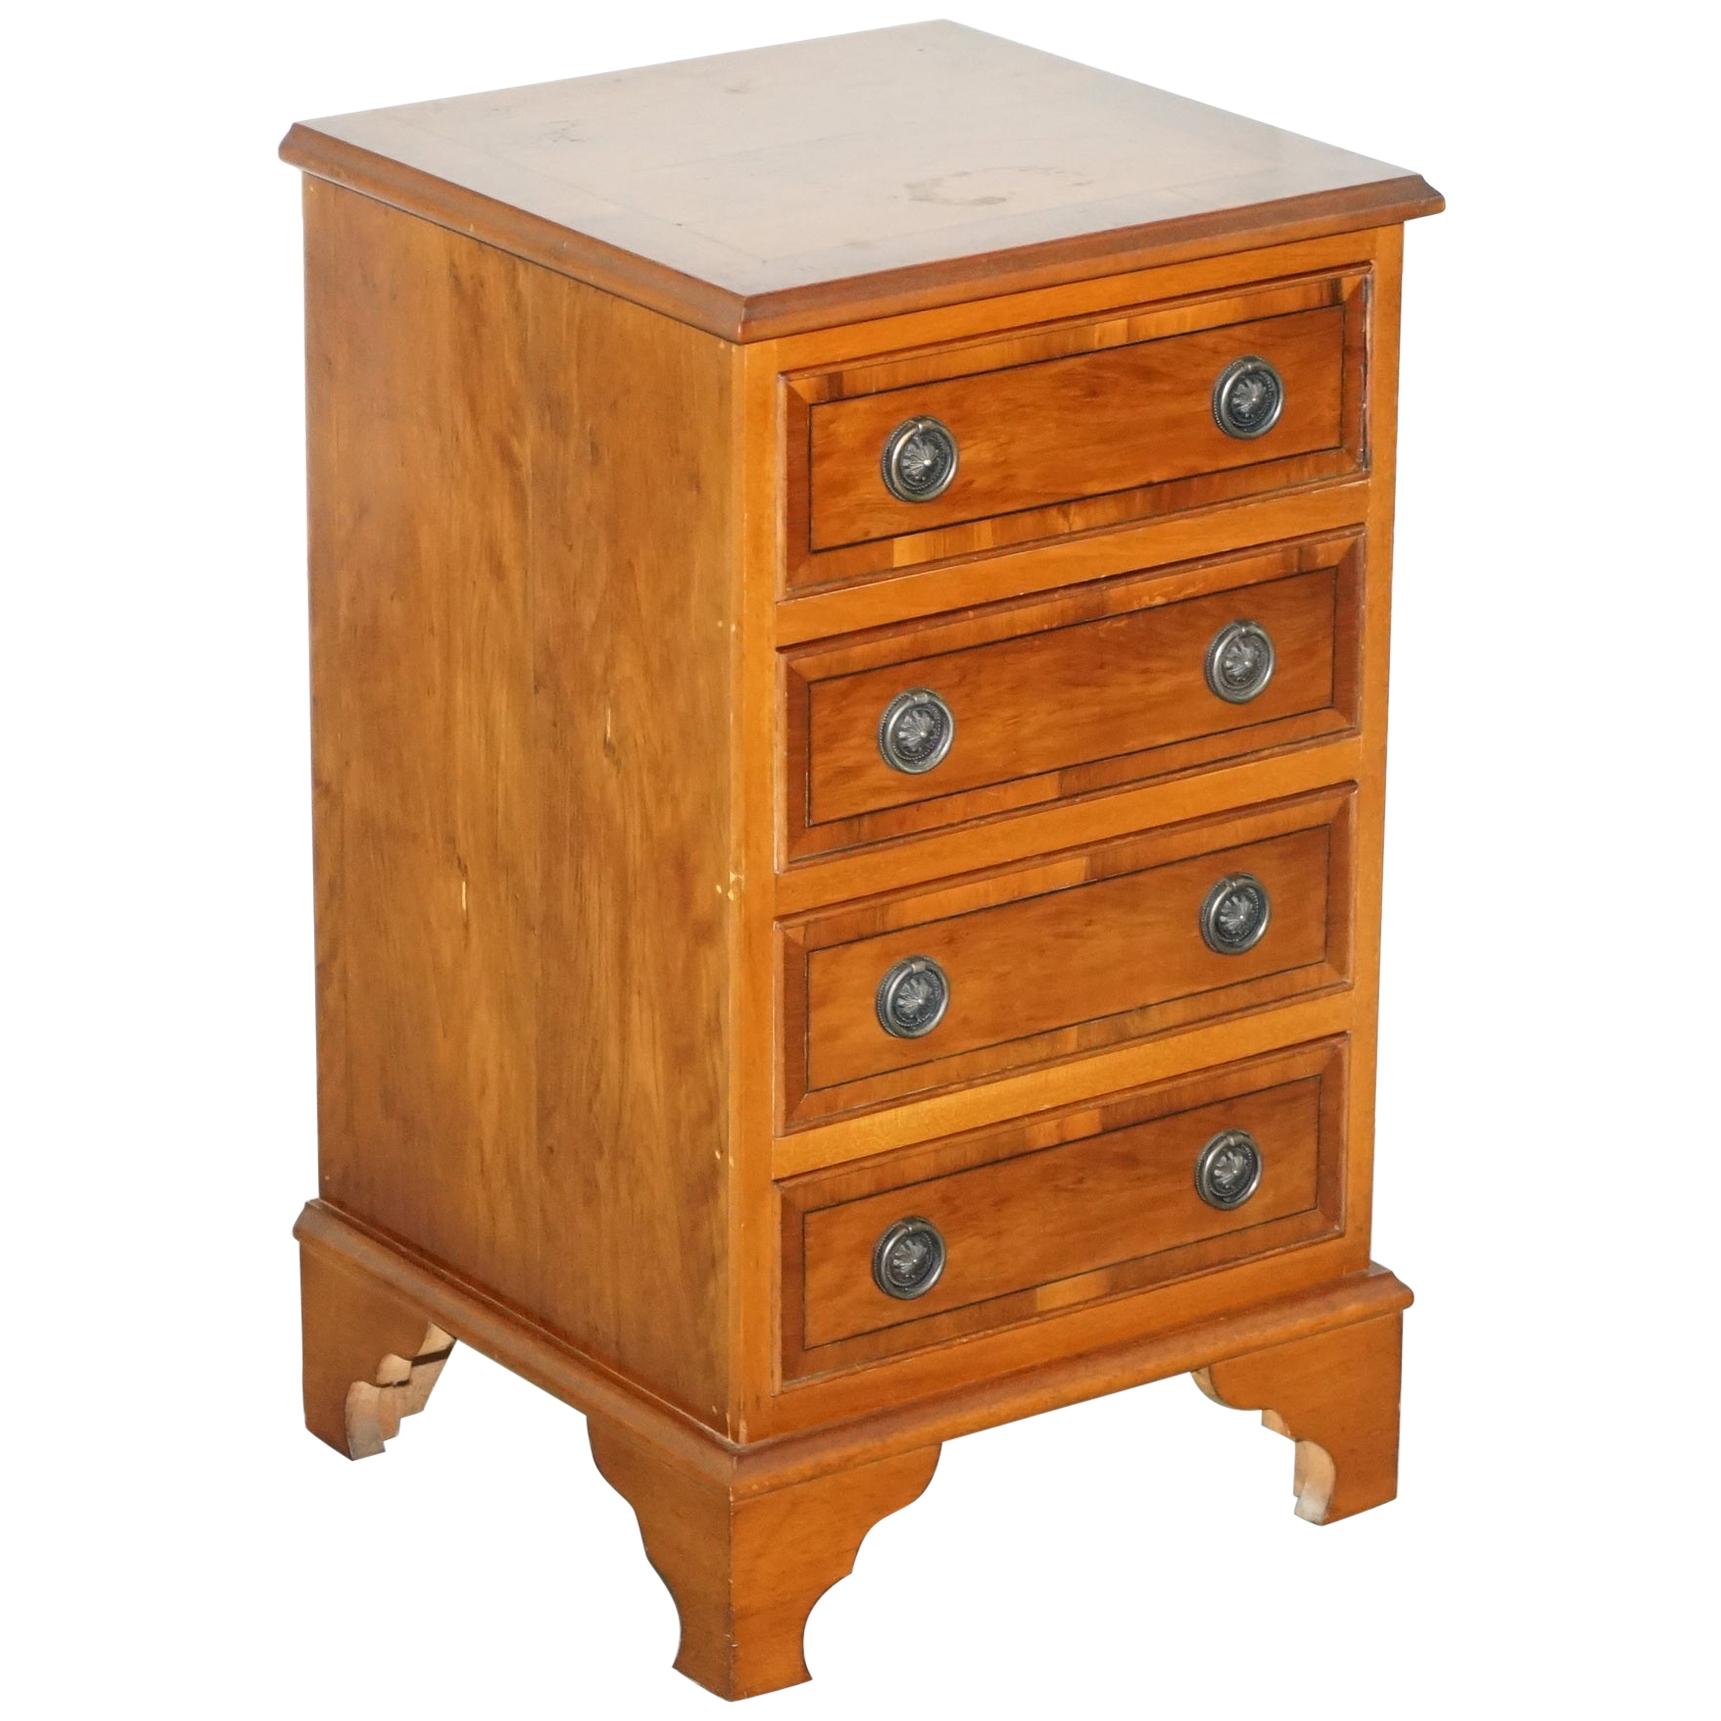 Lovely Burr Yew Wood Side Table Sized Chest of Drawers Georgian Style Very Fine